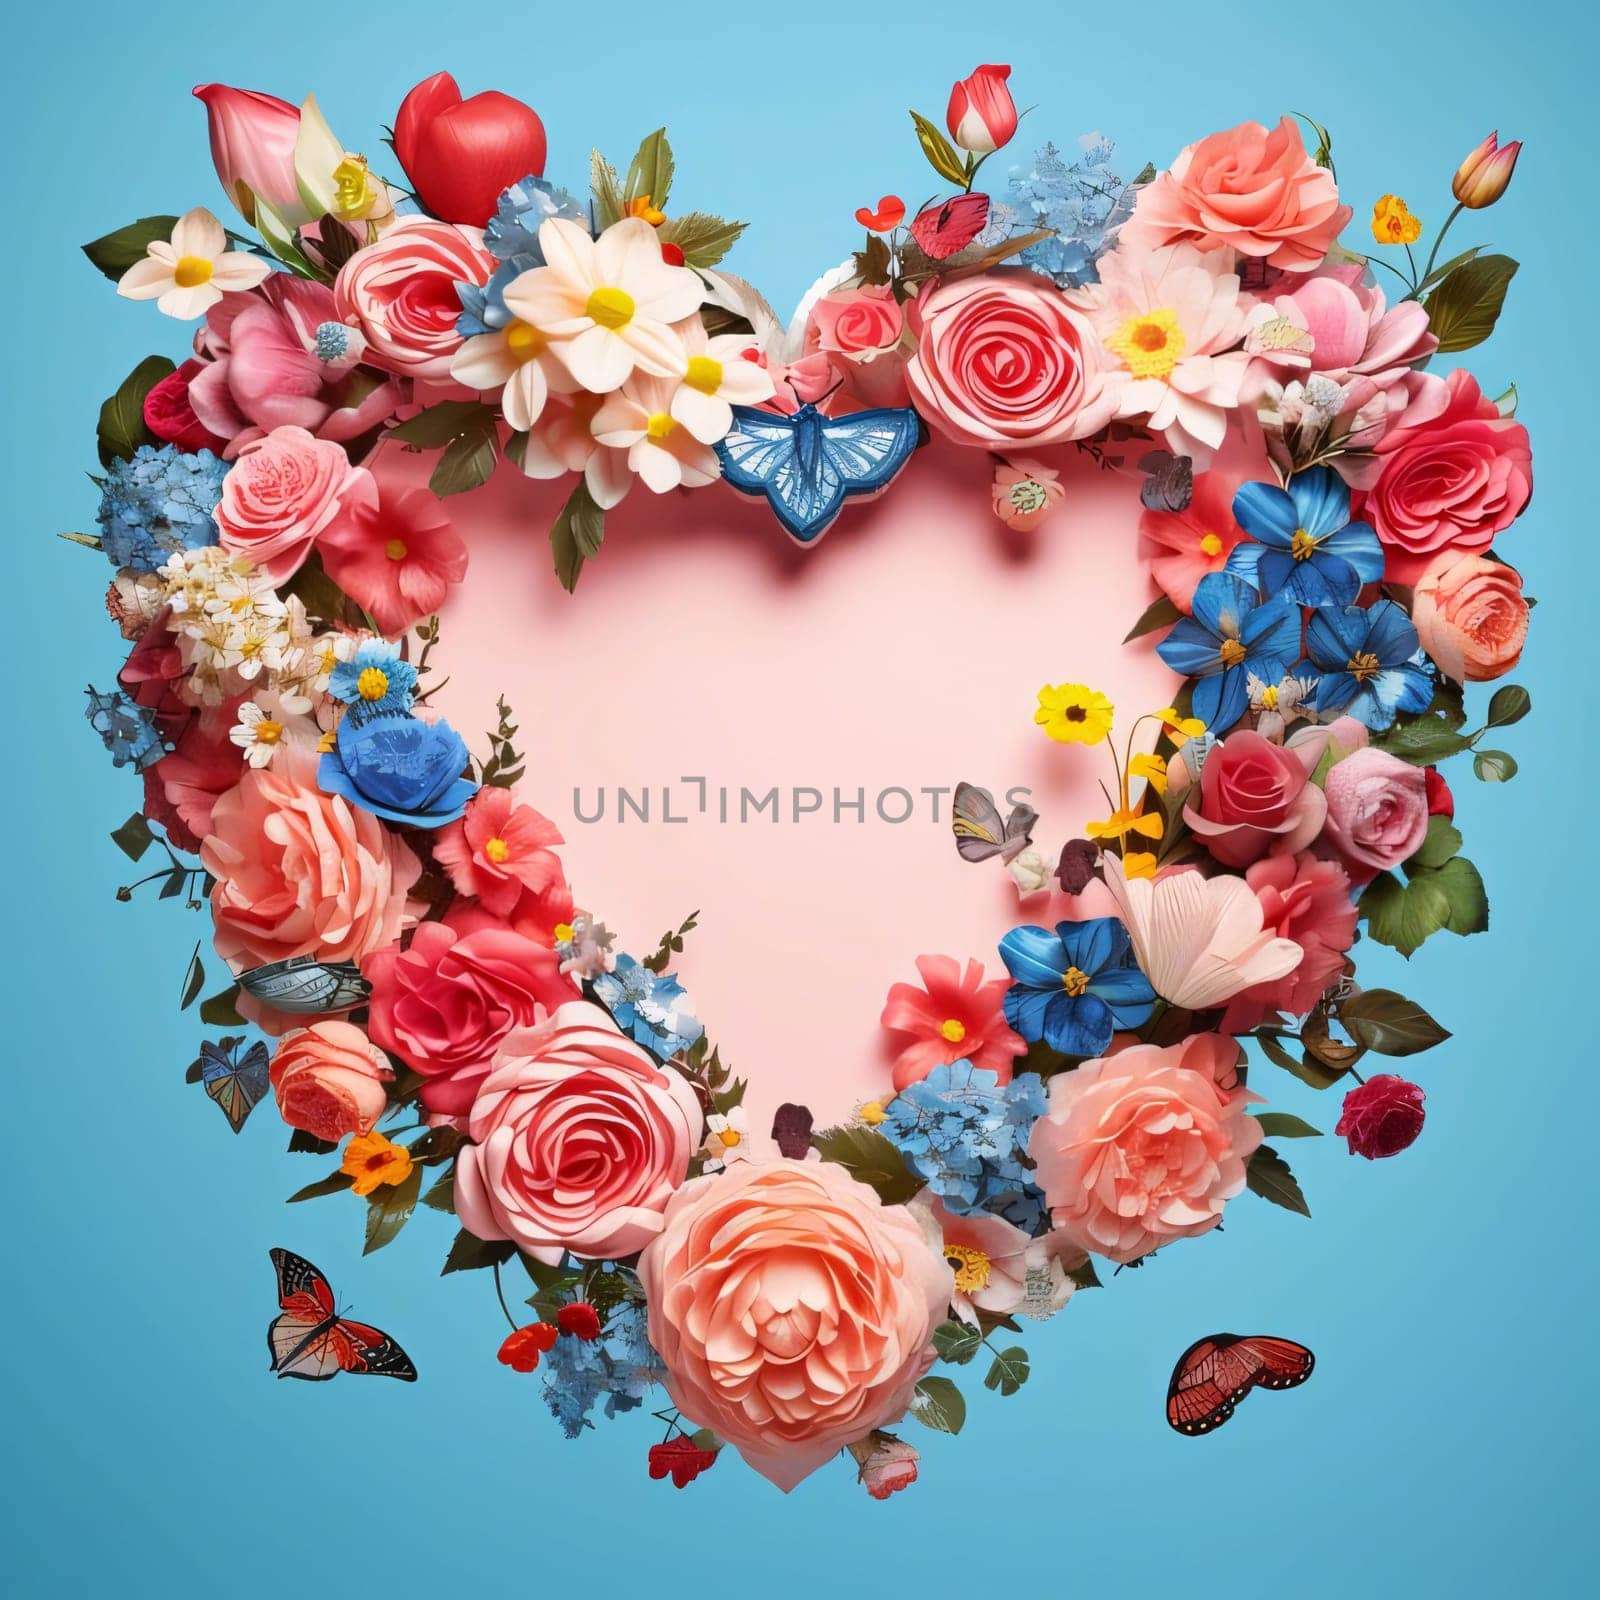 Heart of colorful flowers in the middle blank with space for your own content, blue background. Flowering flowers, a symbol of spring, new life. A joyful time of nature waking up to life.